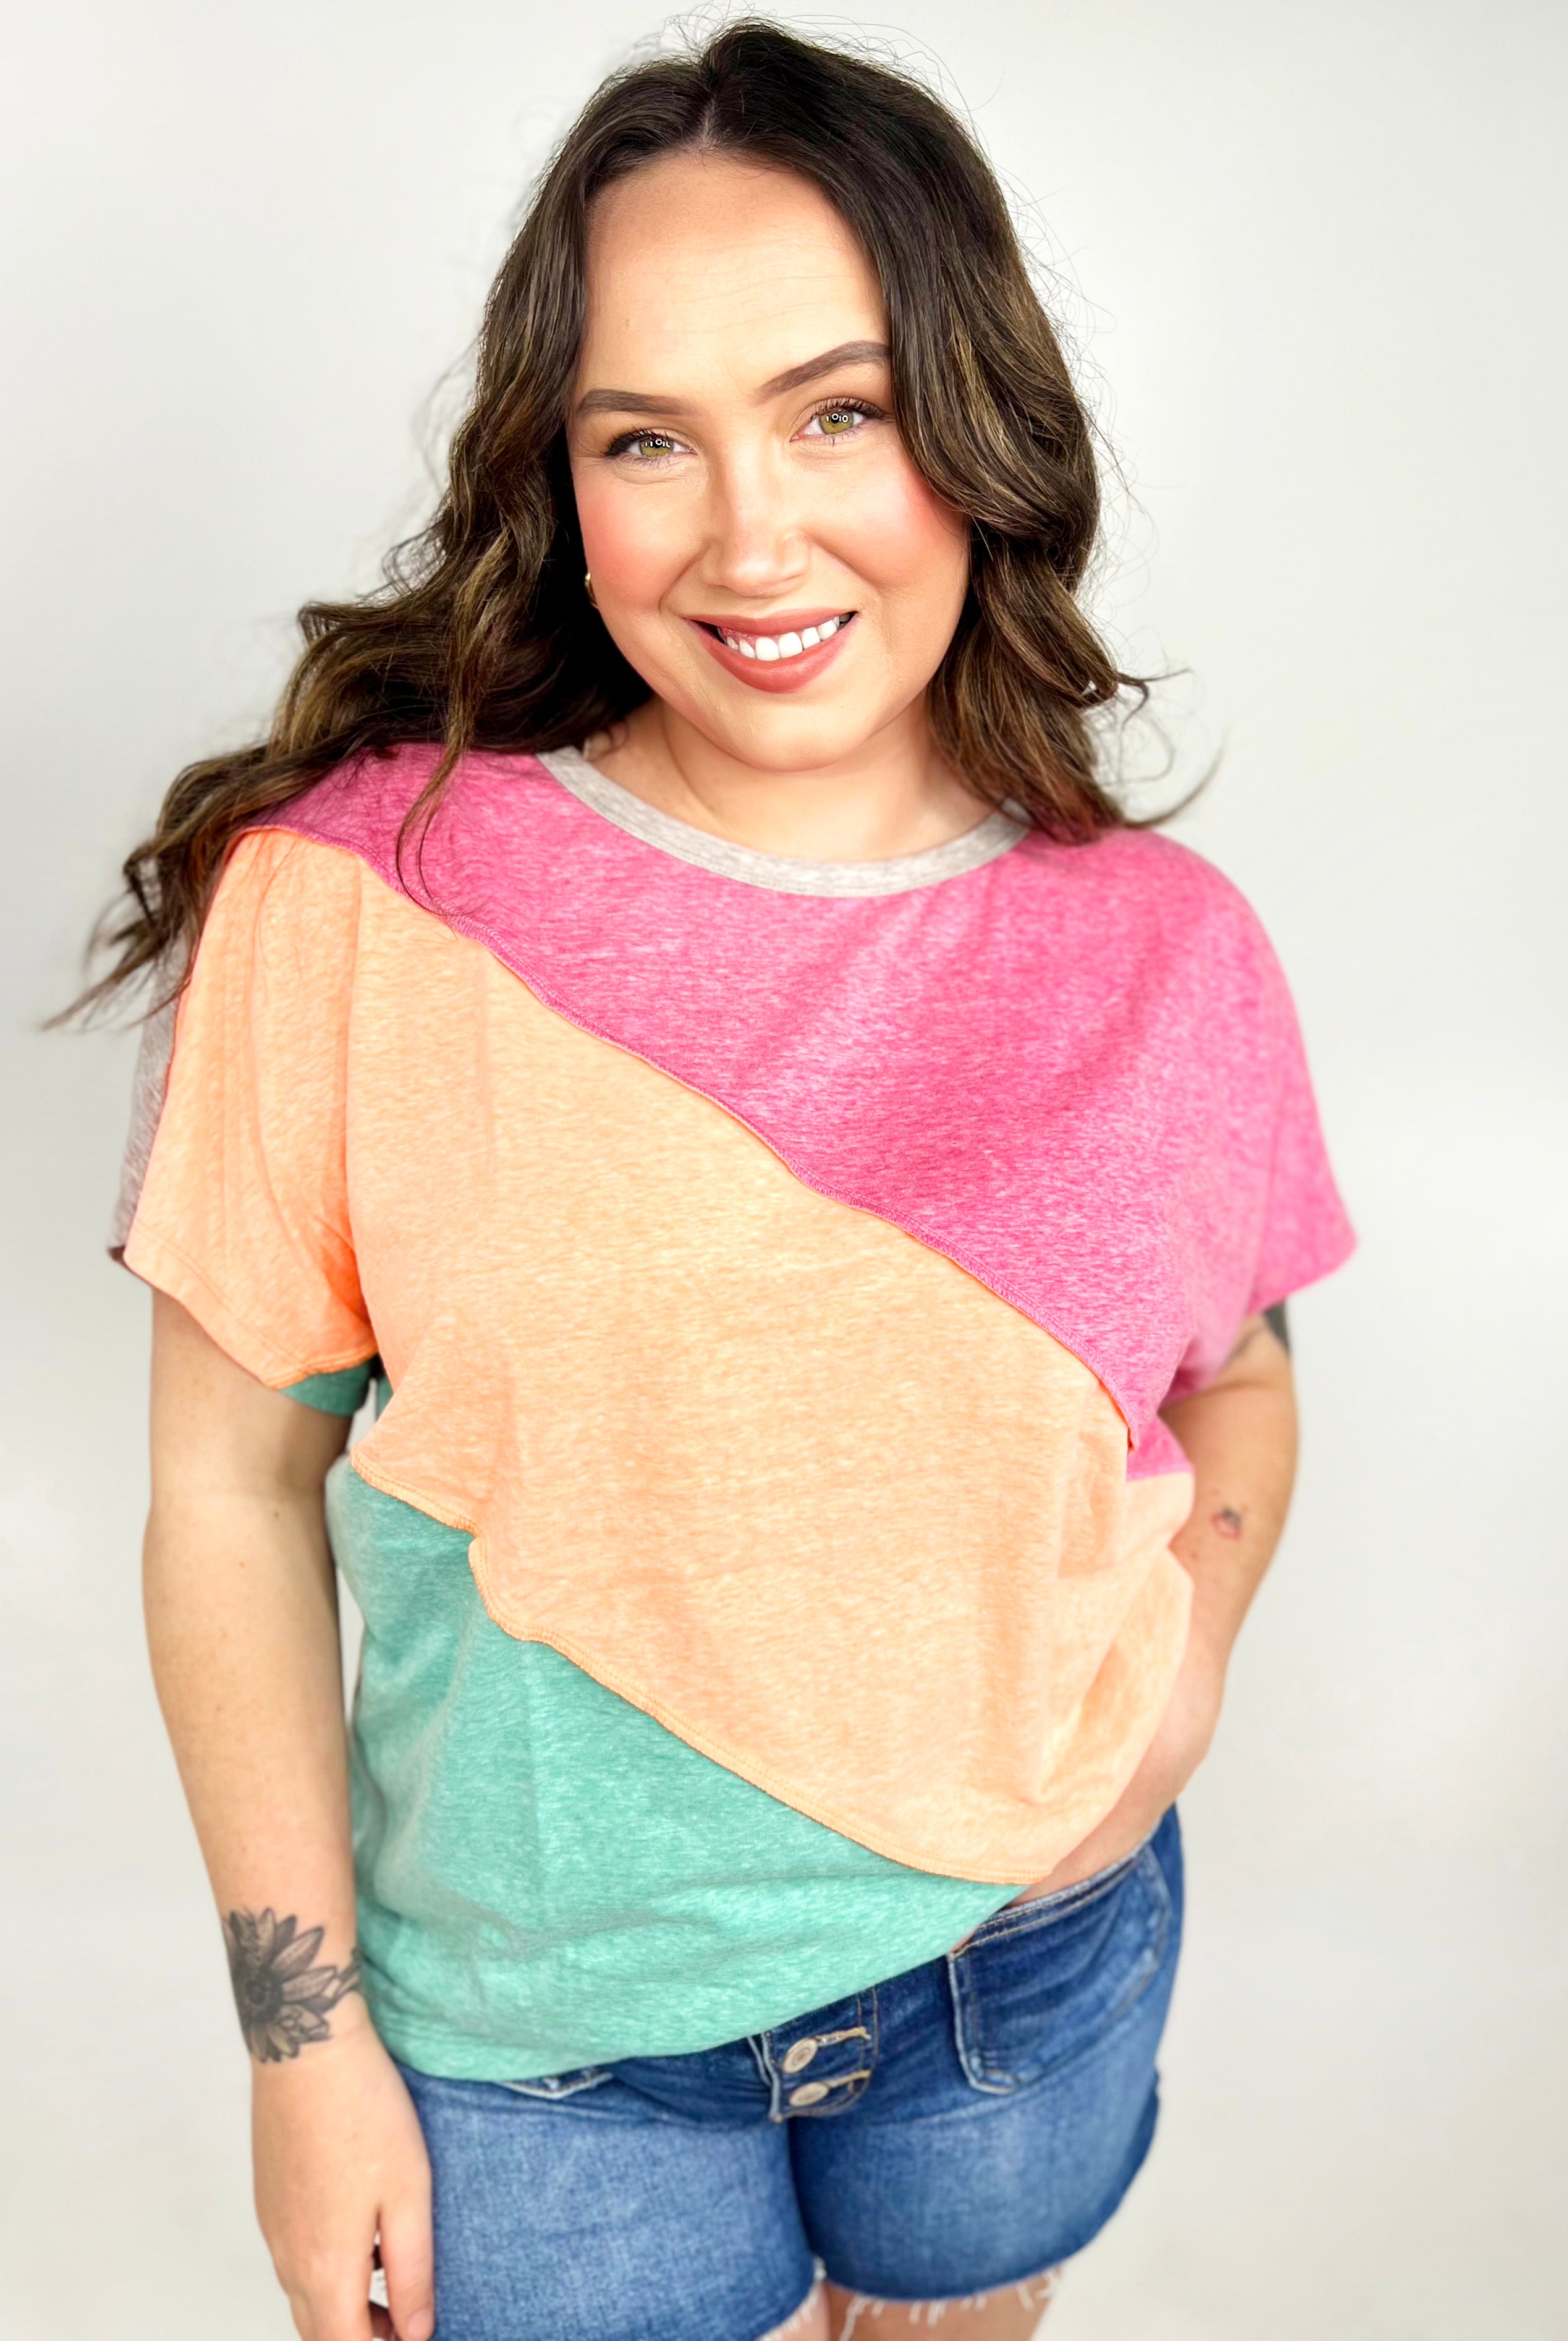 Rainbow Moves Top-110 Short Sleeve Top-Bibi-Heathered Boho Boutique, Women's Fashion and Accessories in Palmetto, FL